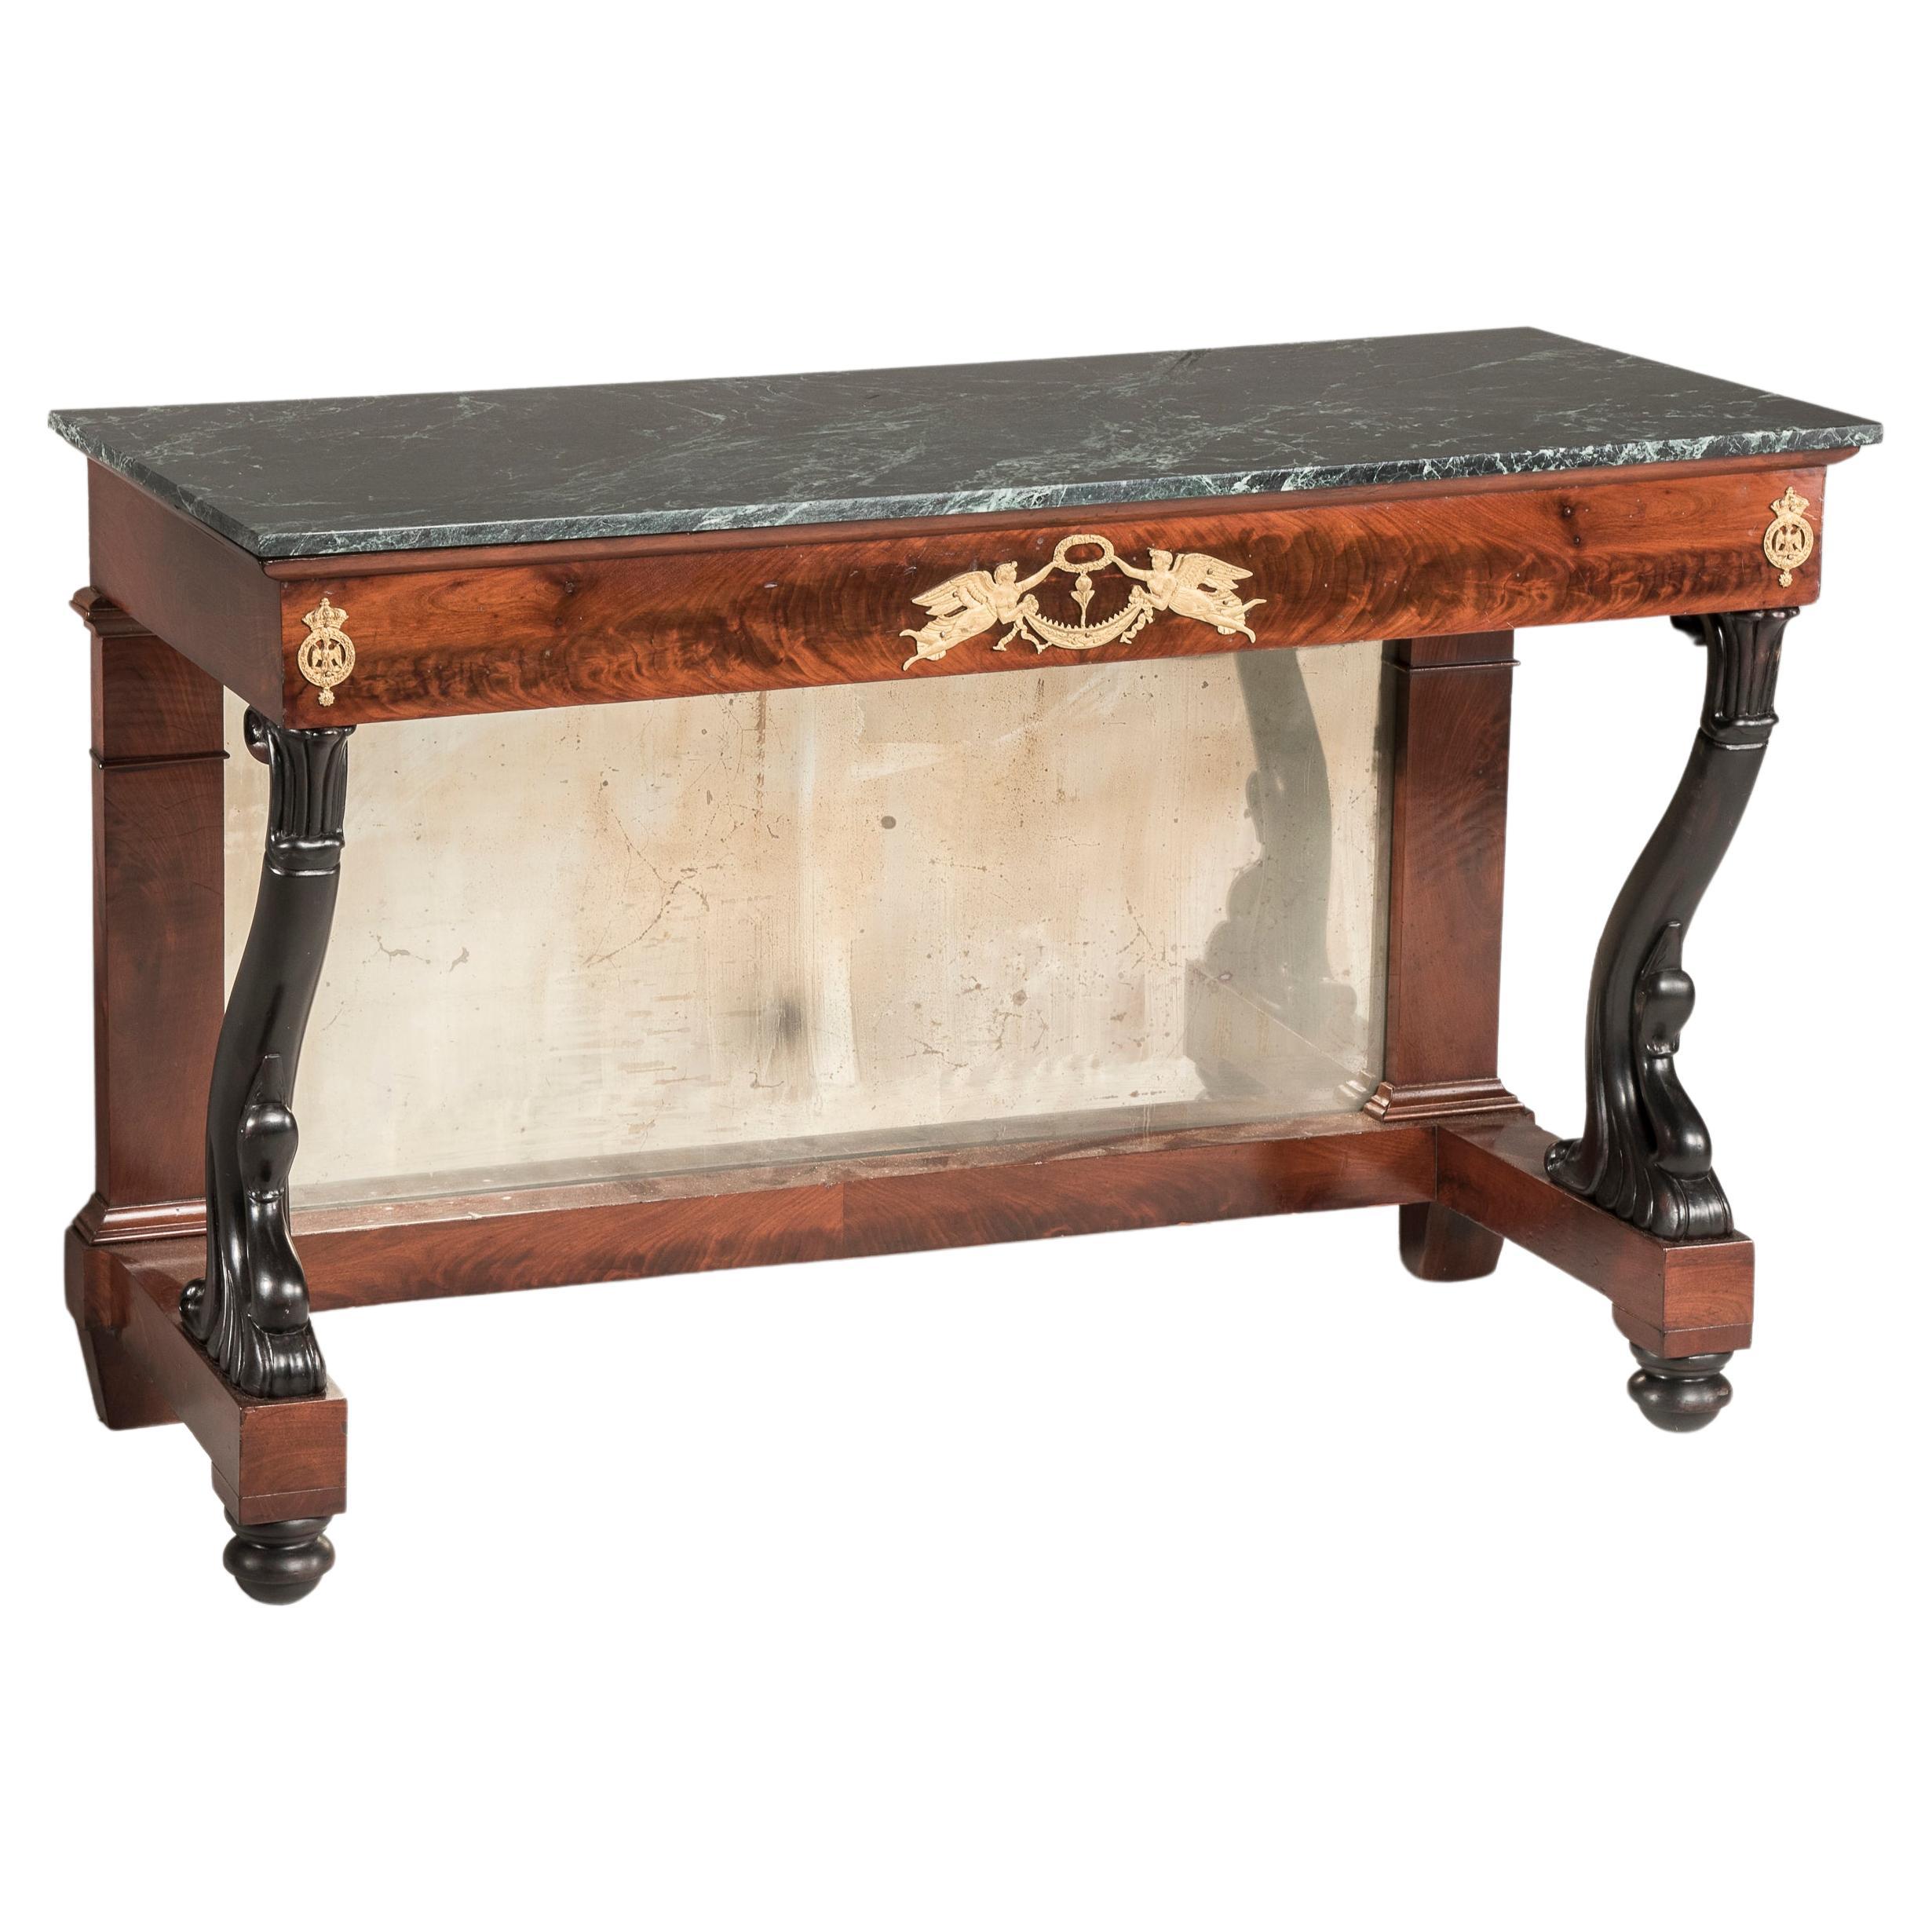 Mahogany and Bronzes Empire Console Table with Marble Top Antique Mirror back For Sale